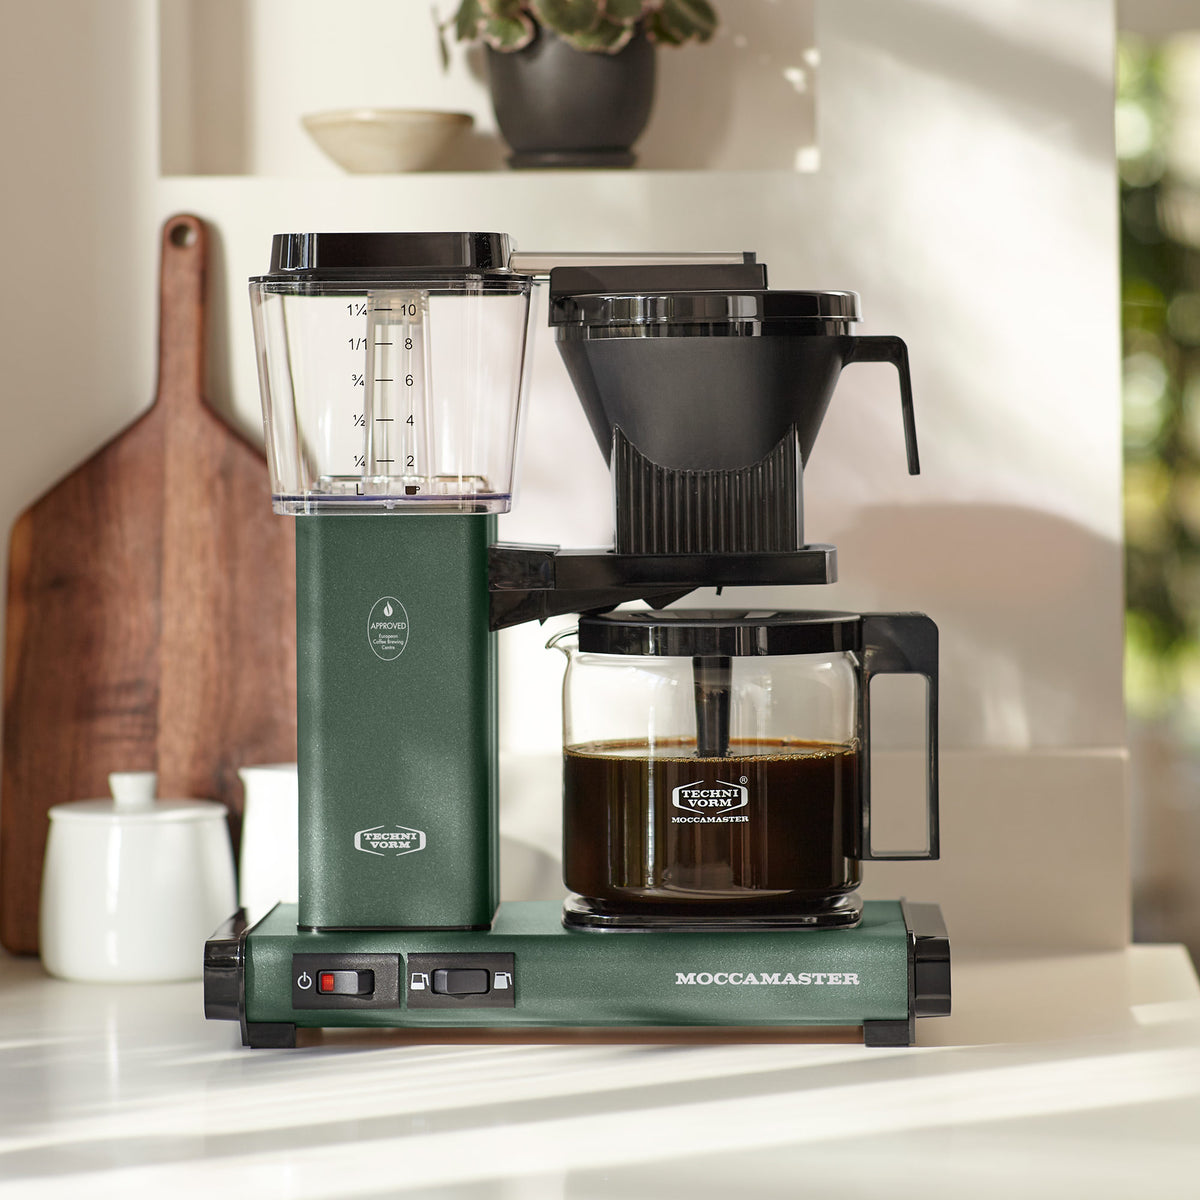 Green Moccamaster coffee maker on a countertop, beside a wooden board, with a plant in the background.